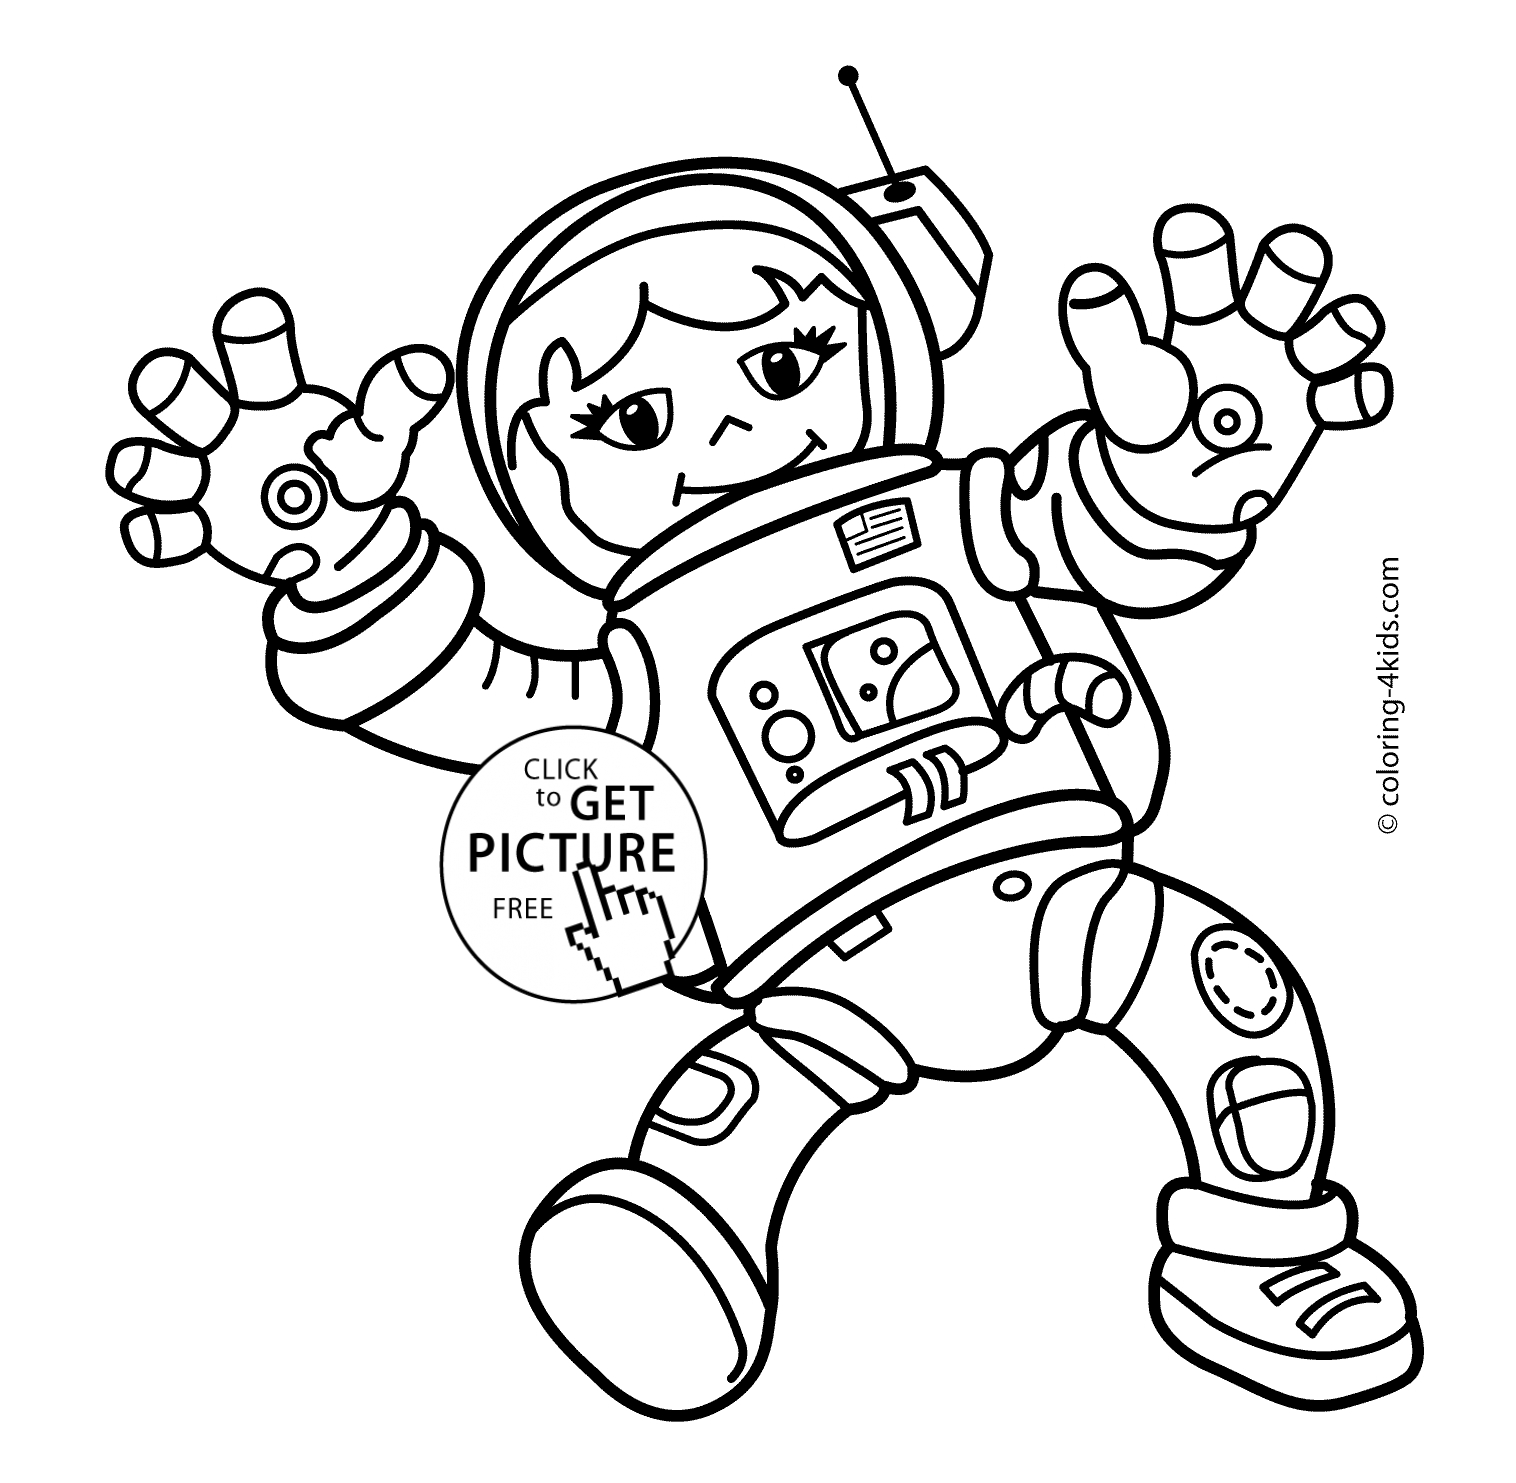 marvelous-picture-of-outer-space-coloring-pages-albanysinsanity